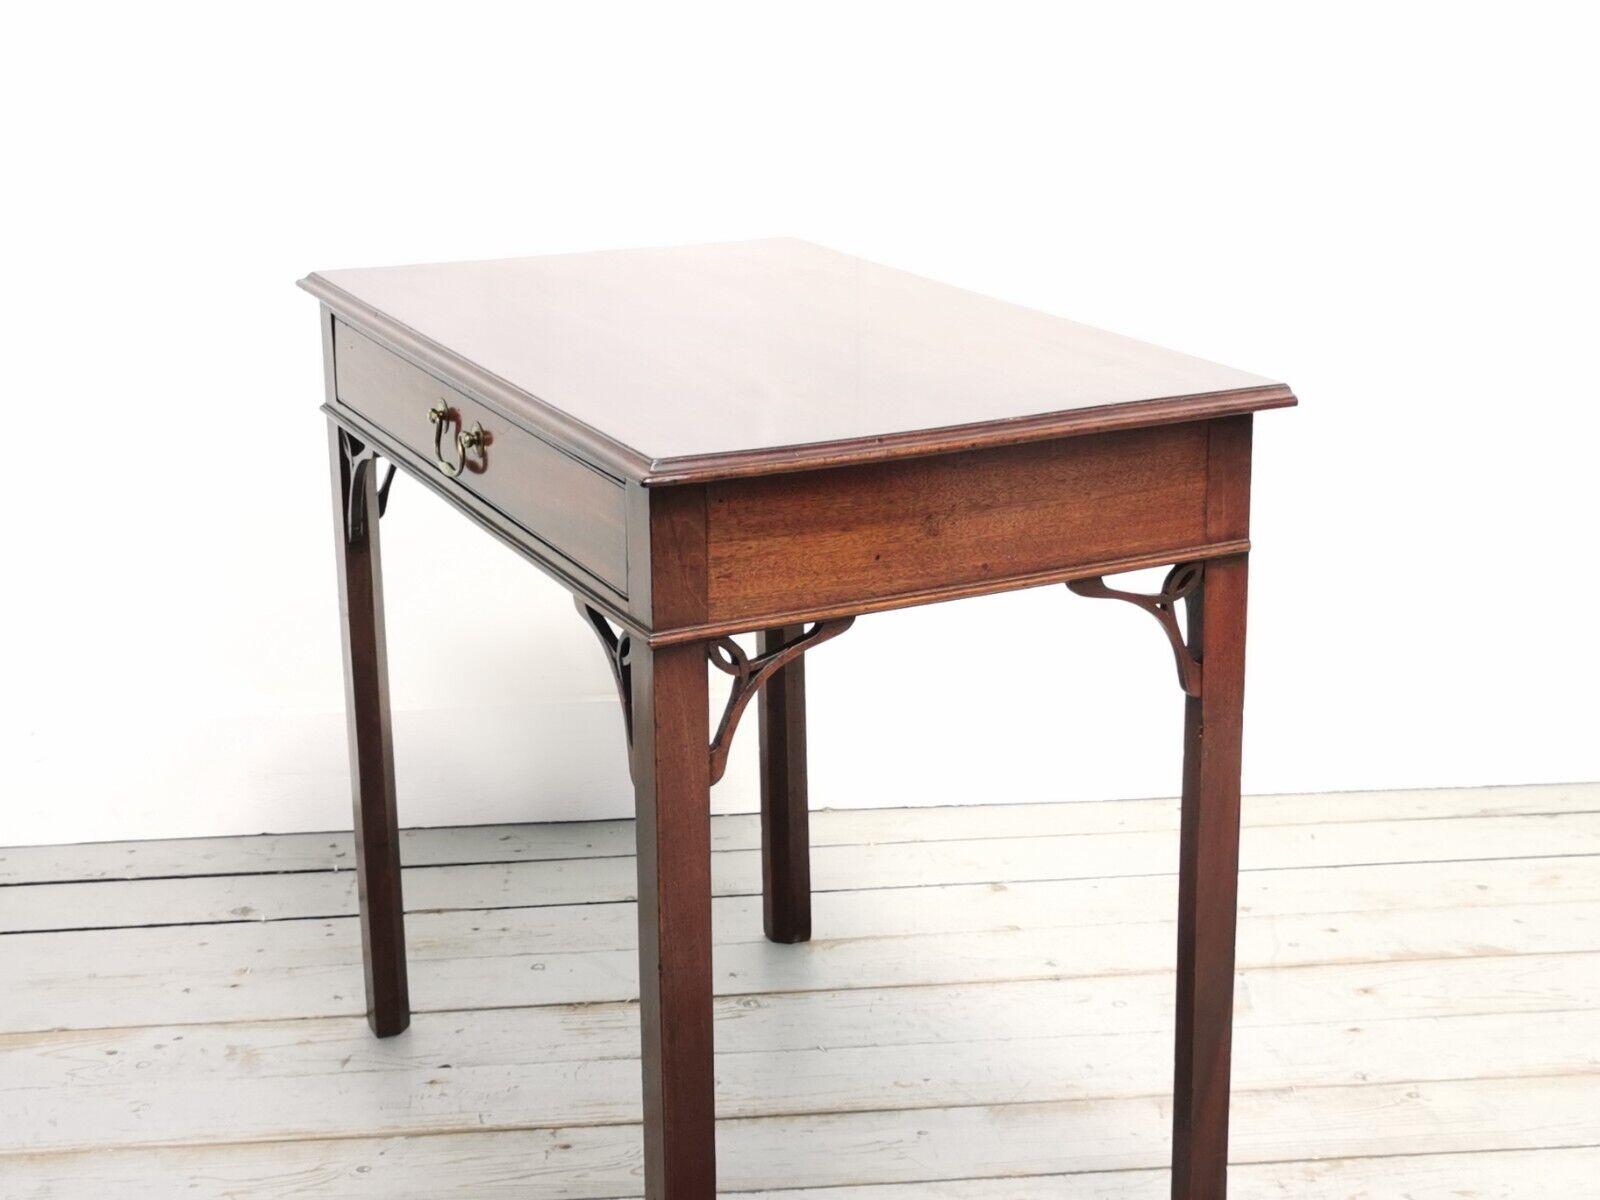 Antique side table

A 19th century English compact side table or writing desk.

Mahogany side table with single frieze drawer with a brass swan neck handle, on inner chamfered square supports with open fretwork corner detail.

Dimensions